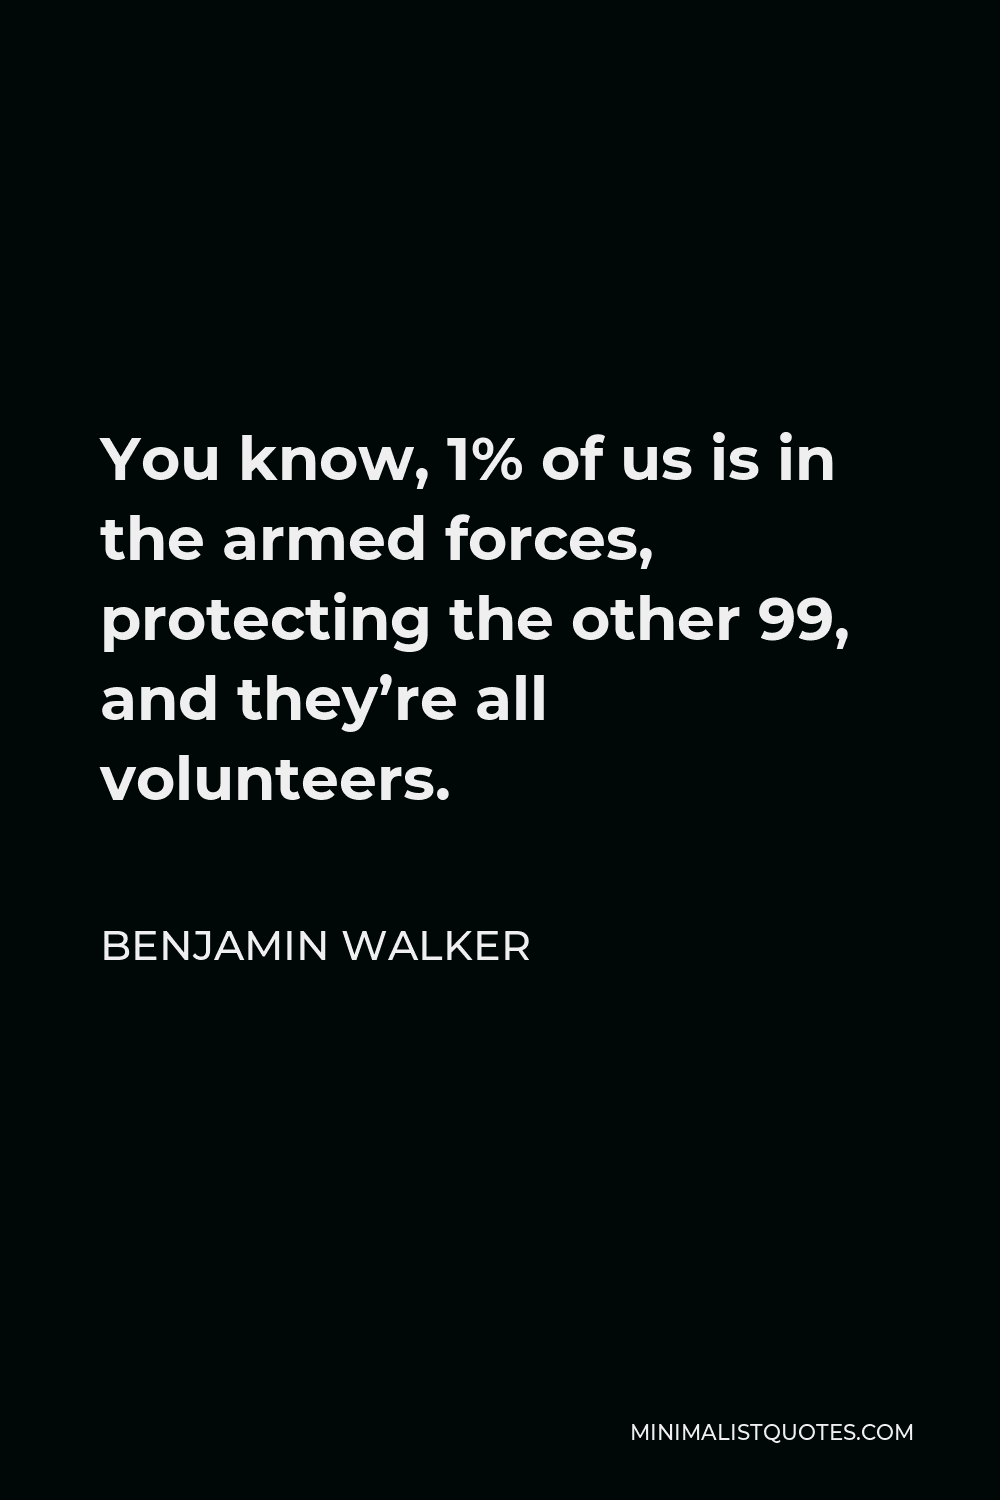 Benjamin Walker Quote - You know, 1% of us is in the armed forces, protecting the other 99, and they’re all volunteers.